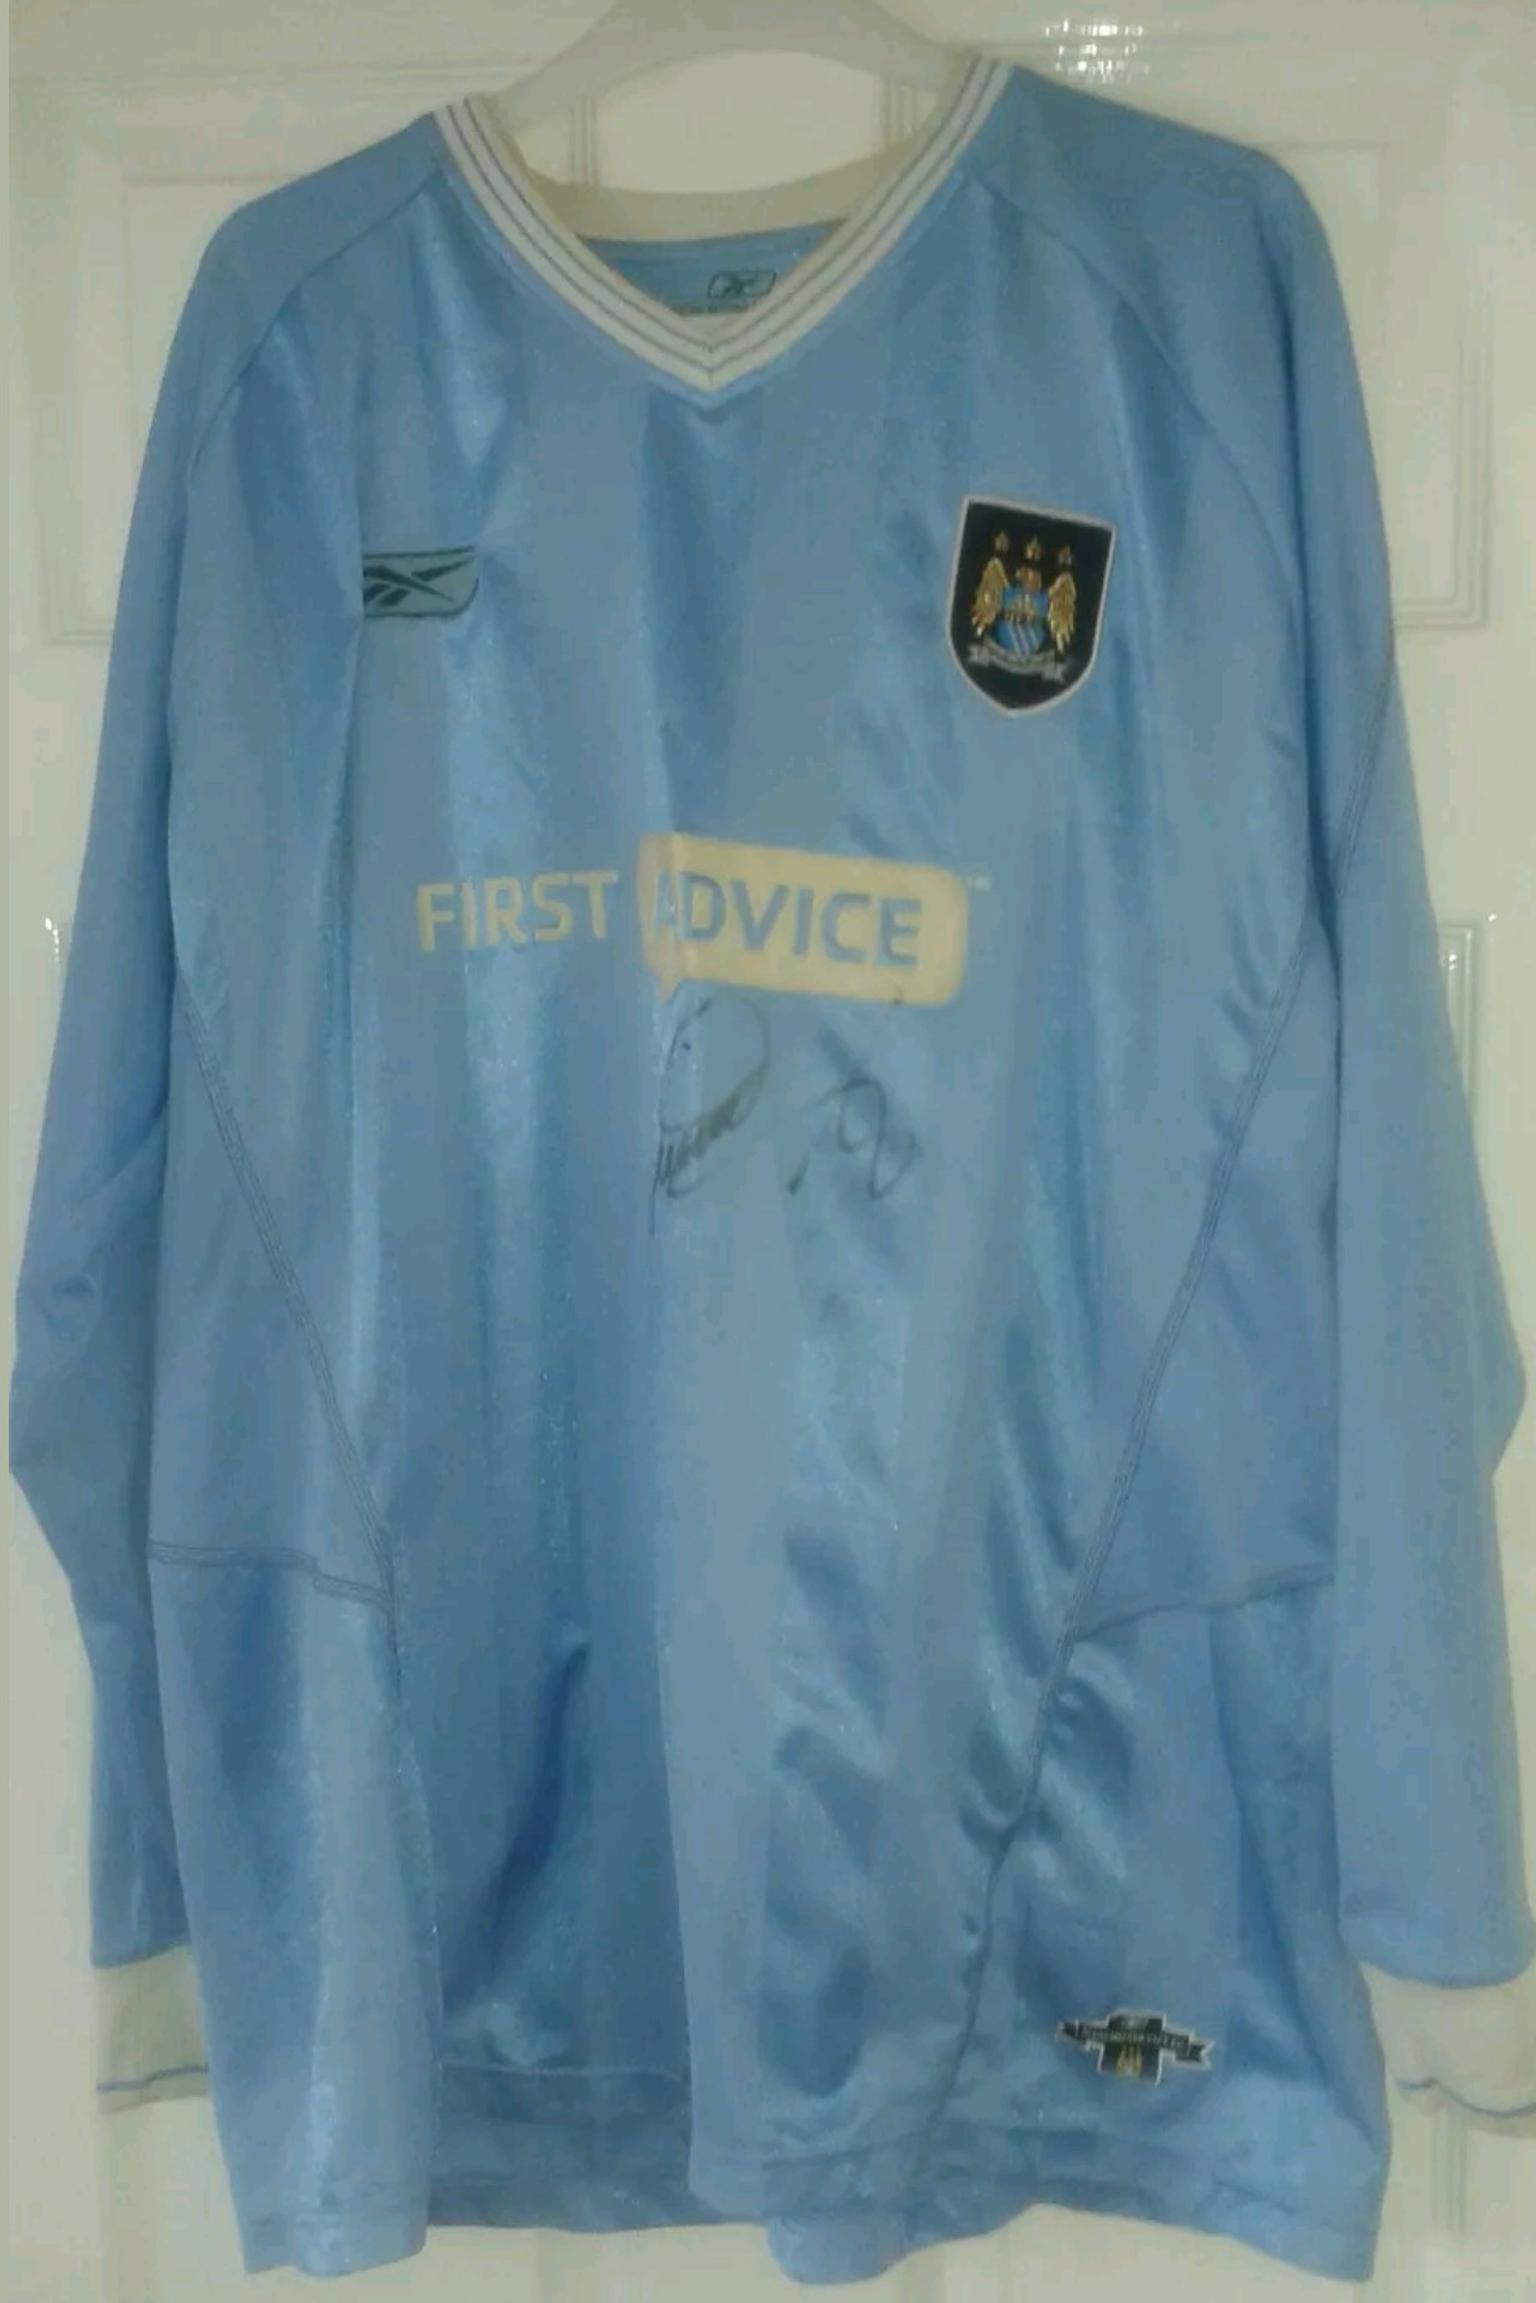 Manchester City Match Worn & Signed Shirt in S6 Sheffield for £60.00 for  sale | Shpock